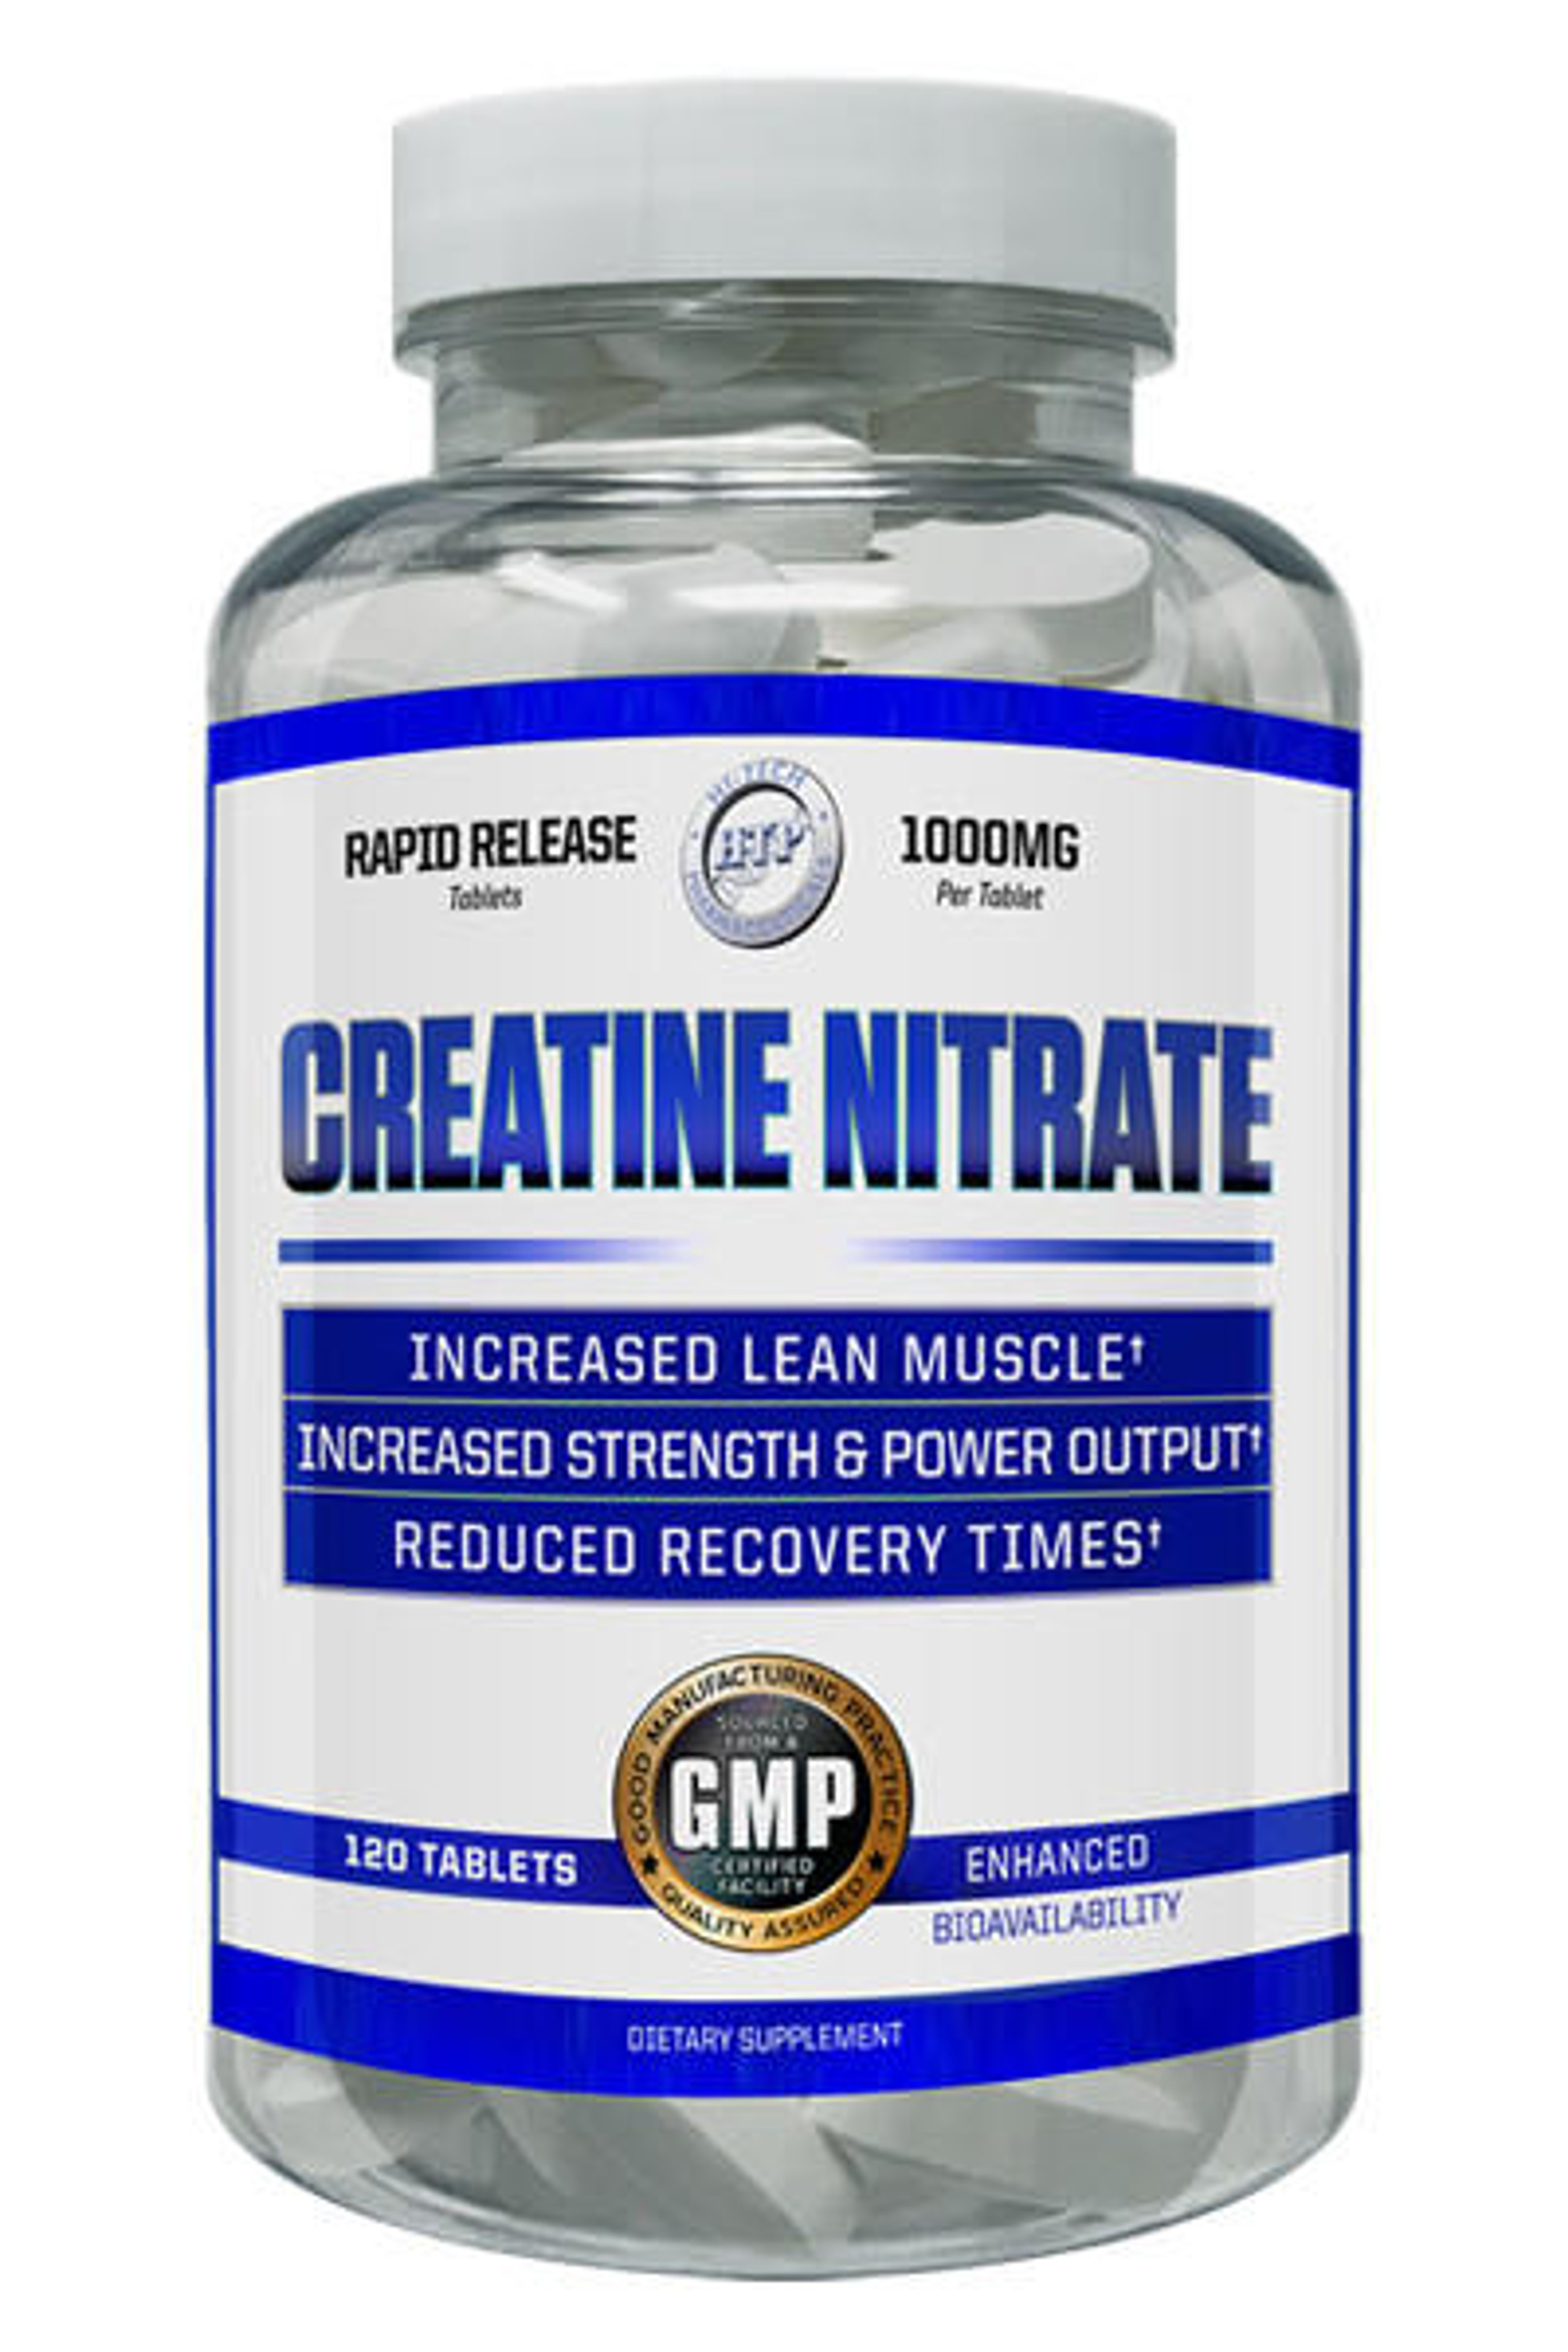 Creatine Nitrate by Hi-Tech Pharmaceuticals